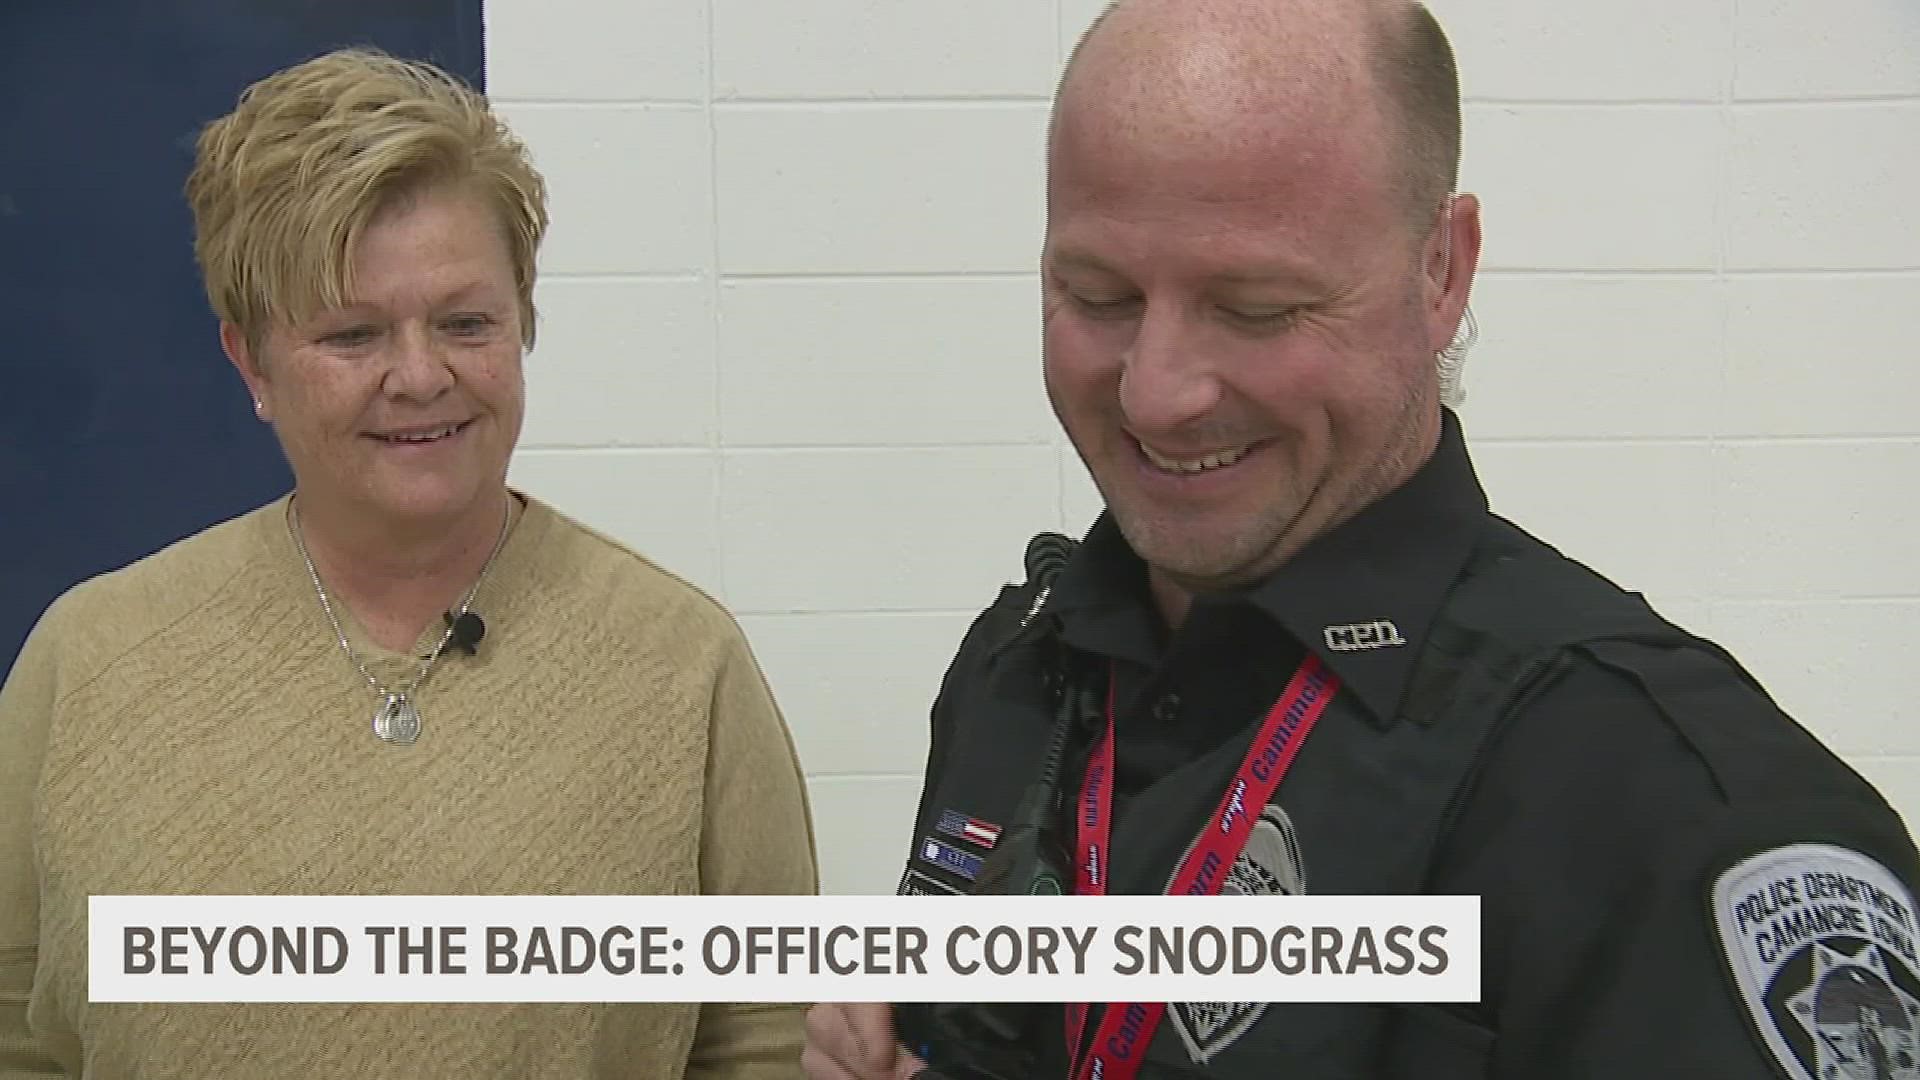 Officer Cory Snodgrass was awarded for his many off-patrol services, such as founding the RoC food pantry, working as a volunteer firefighter and EMT, and much more.